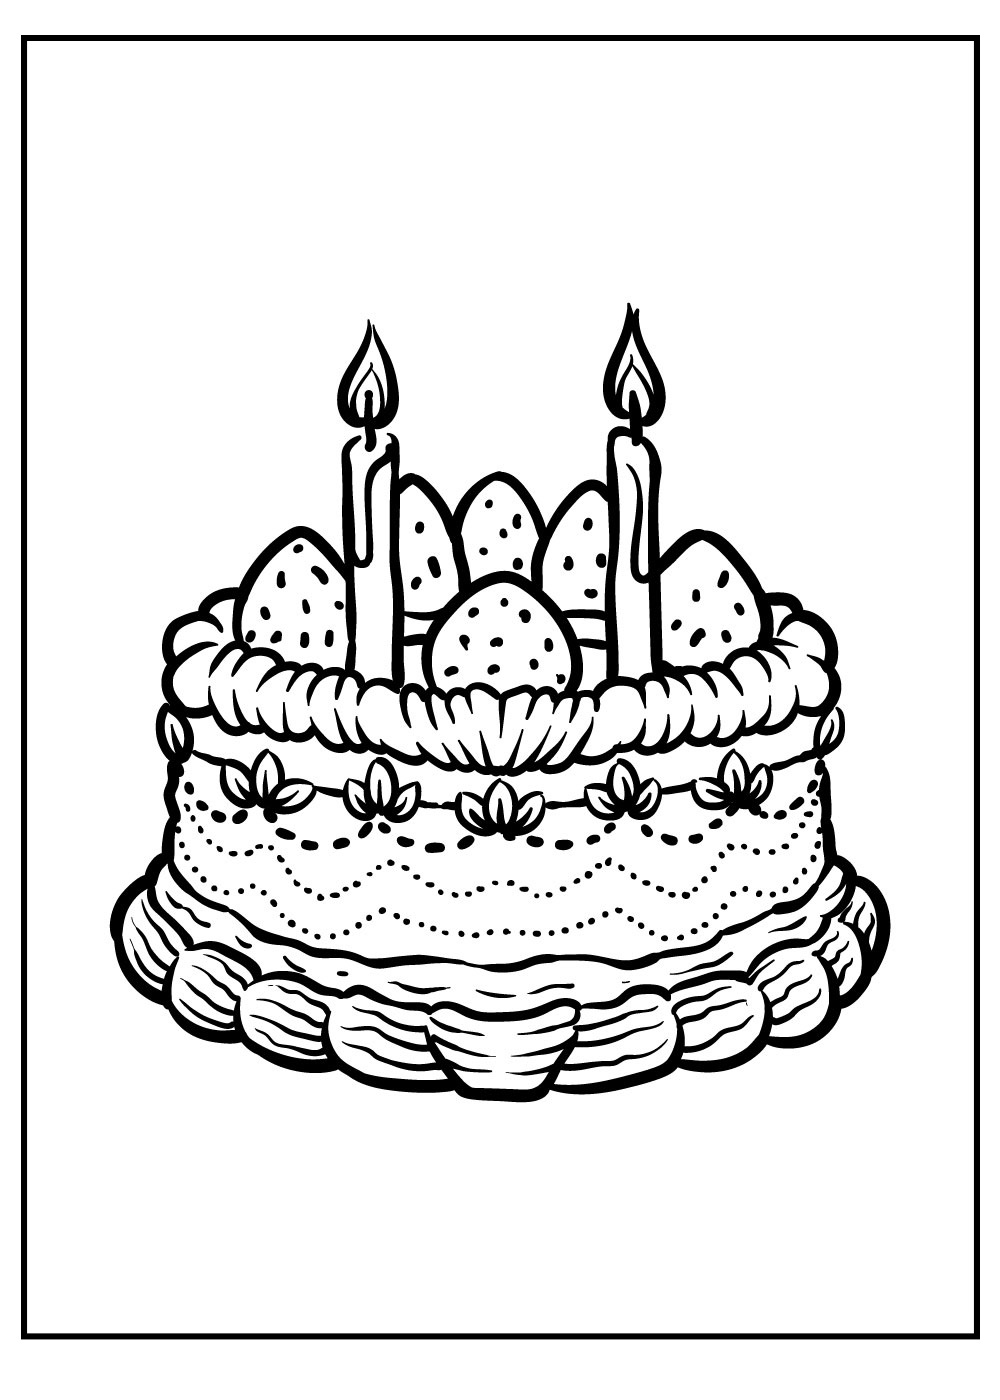 Free Nice Birthday Cake With Heart Form Coloring Page